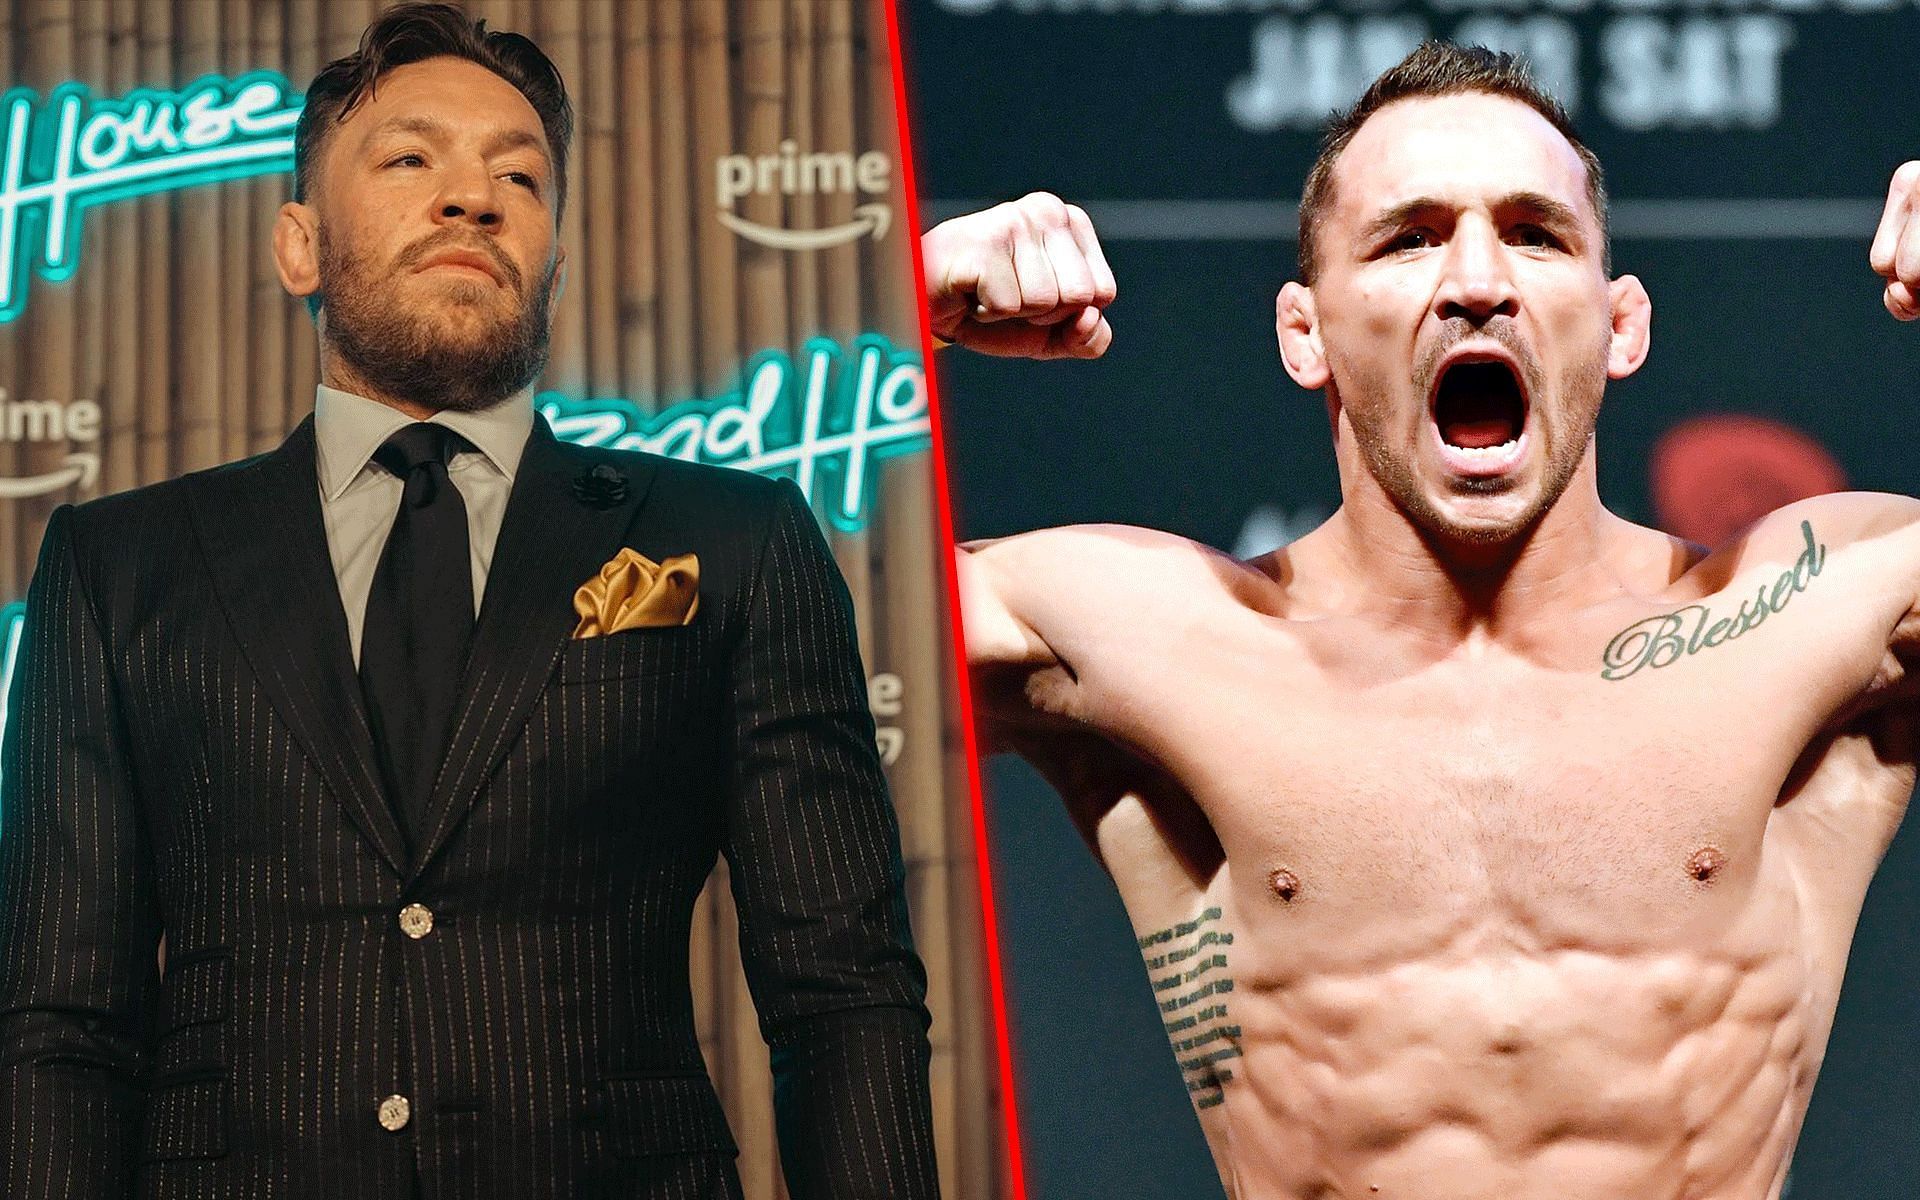 Michael Chandler (right) wants to retire Conor McGregor (left) from combat sports [Images courtesy: @thenotoriousmma on Instagram and Getty]